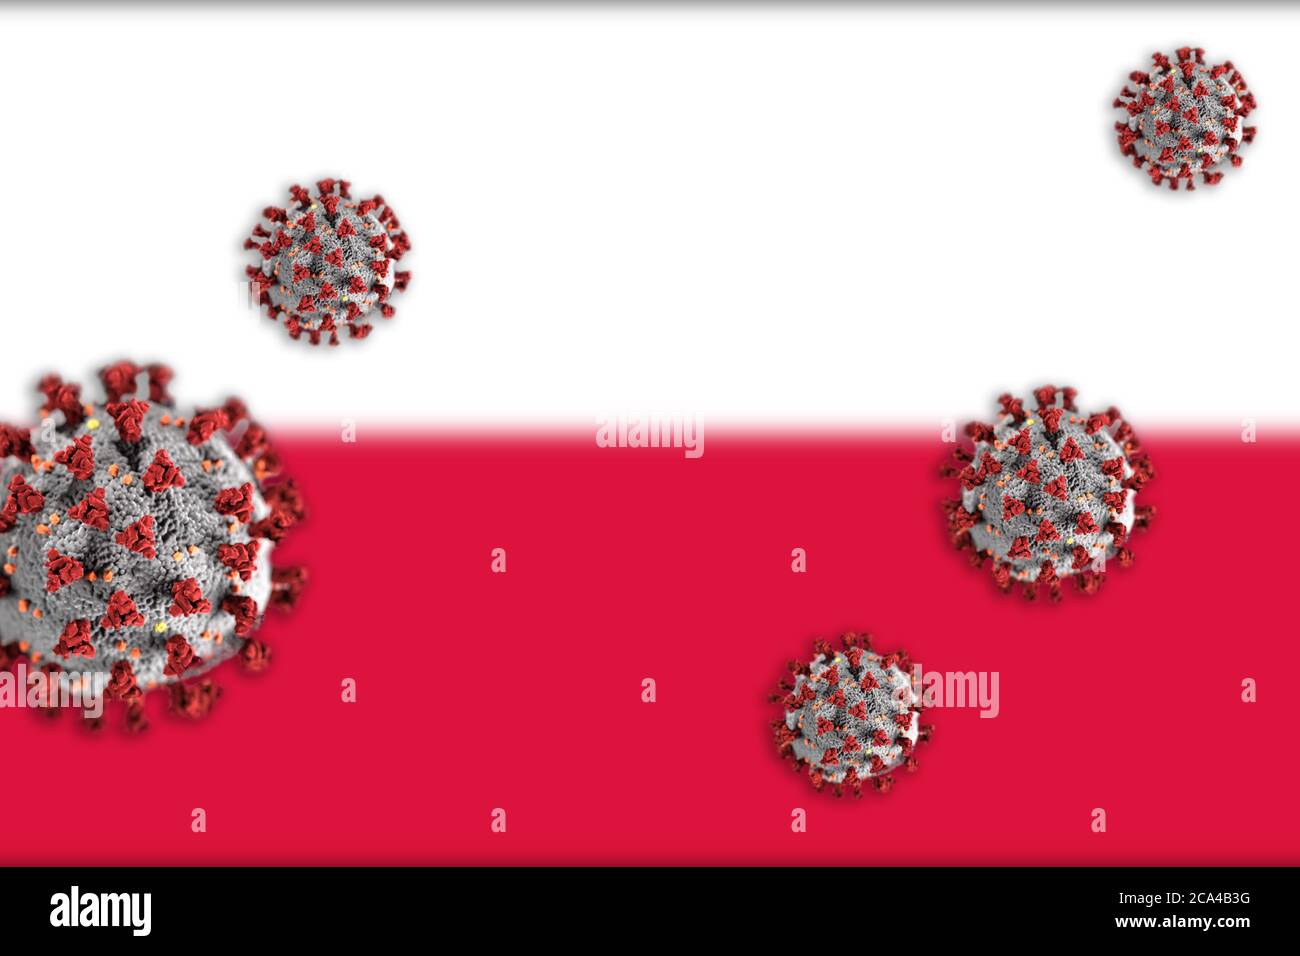 Concept of Coronavirus or Covid-19 particles overshadowing blurred flag of Poland in background. Stock Photo